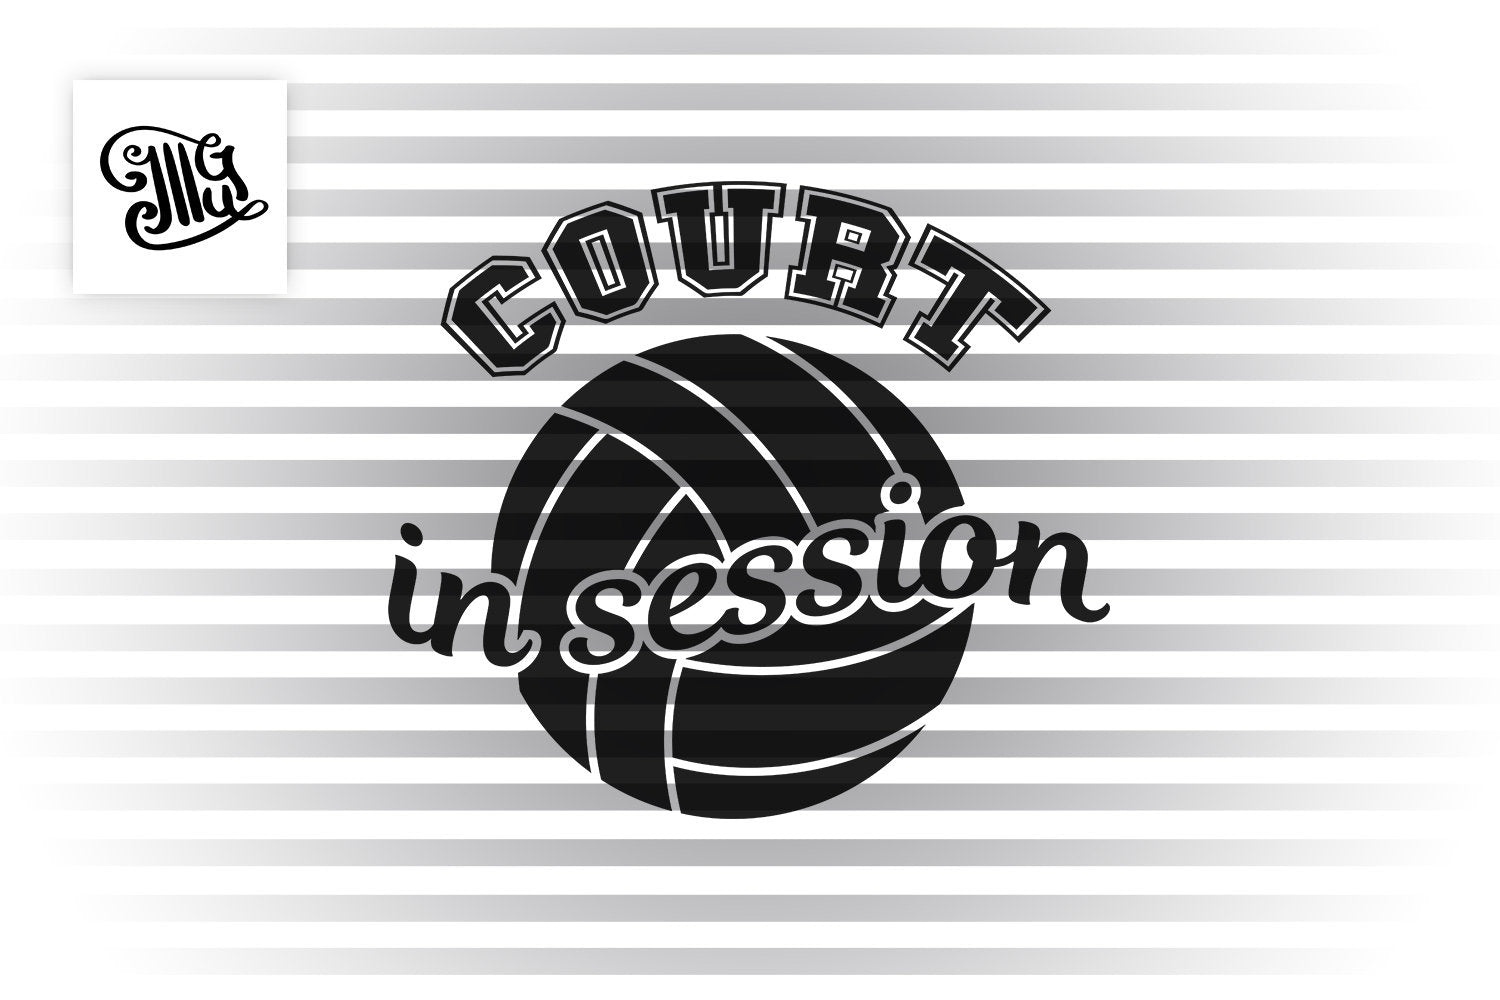 Download Volleyball Svg Court In Session Svg Volleyball Girl Svg Volleyball Illustrator Guru